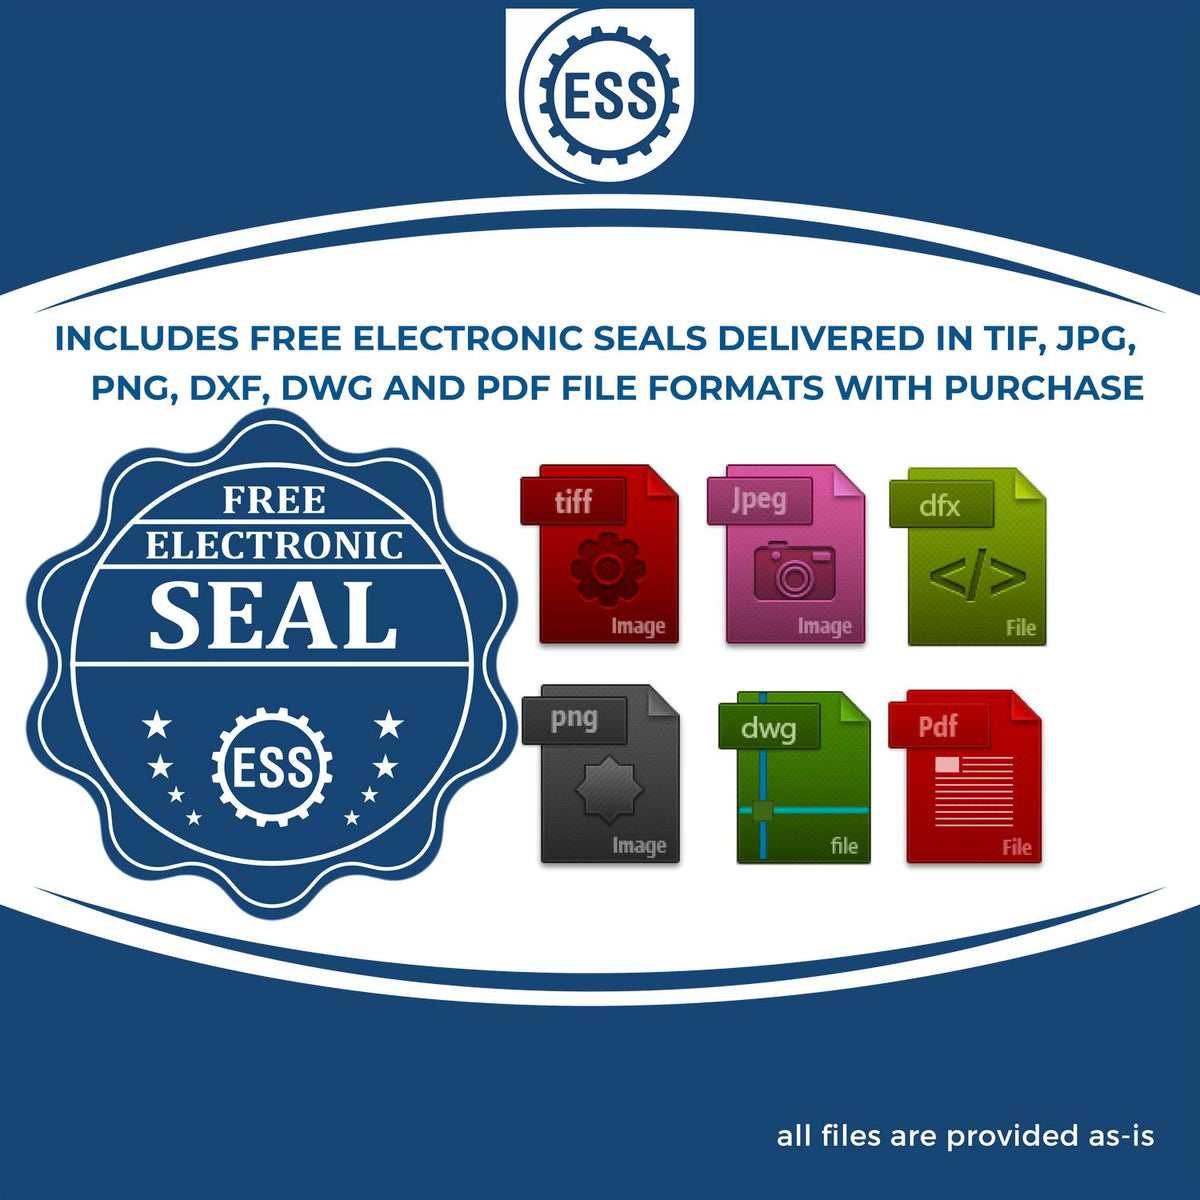 An infographic for the free electronic seal for the Heavy Duty Cast Iron South Carolina Engineer Seal Embosser illustrating the different file type icons such as DXF, DWG, TIF, JPG and PNG.